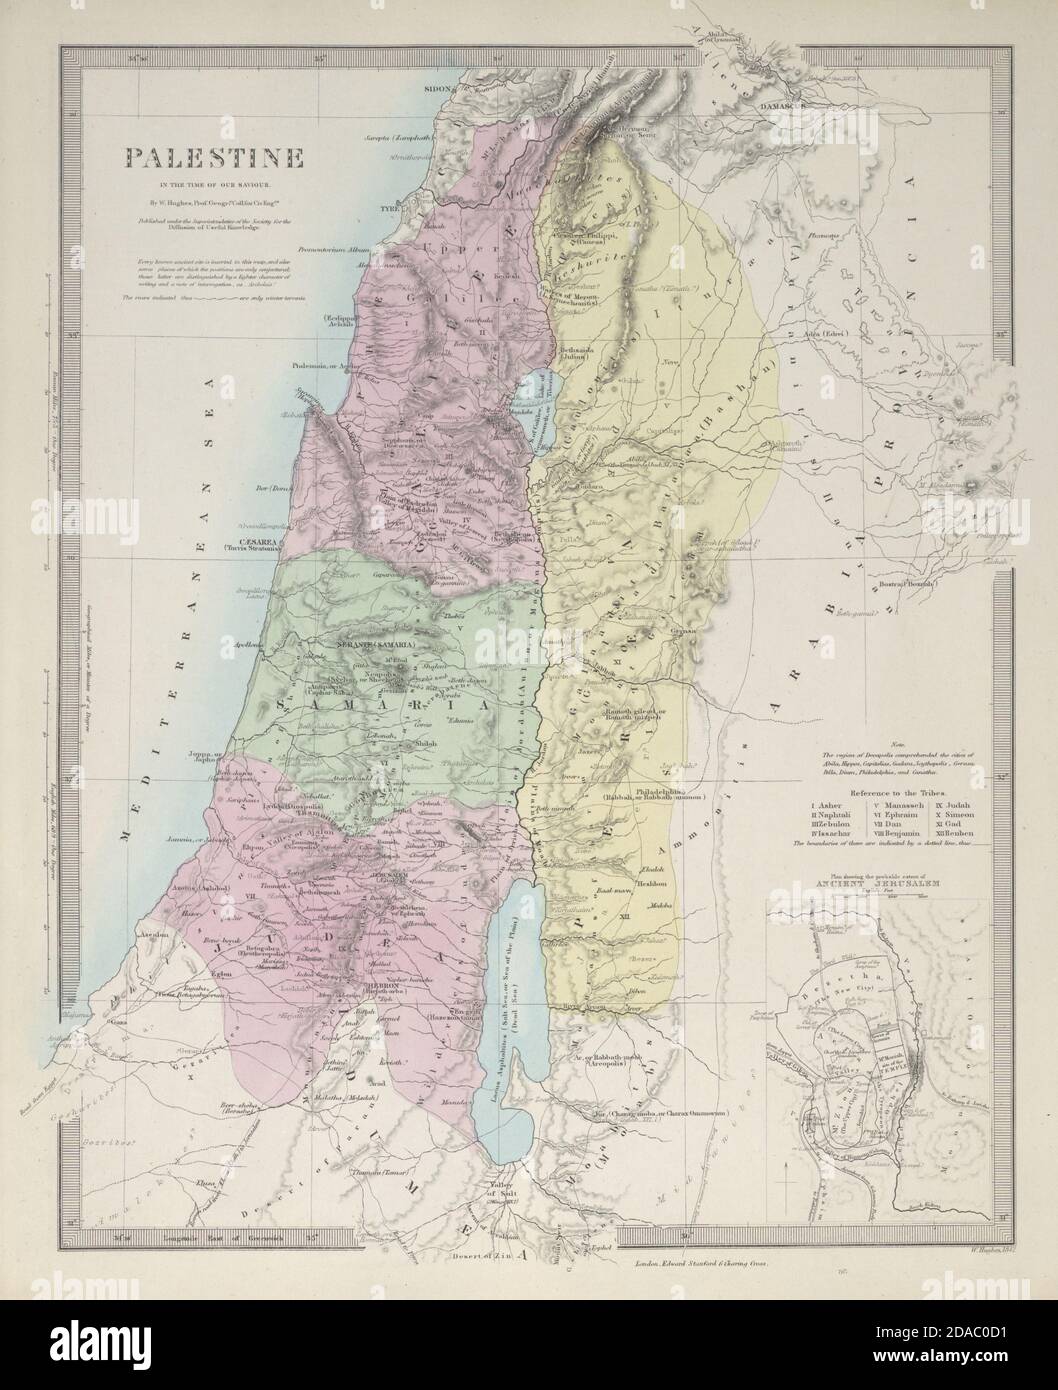 PALESTINE in the time of Our Saviour. Ancient Jerusalem. Israel. SDUK 1857 map Stock Photo